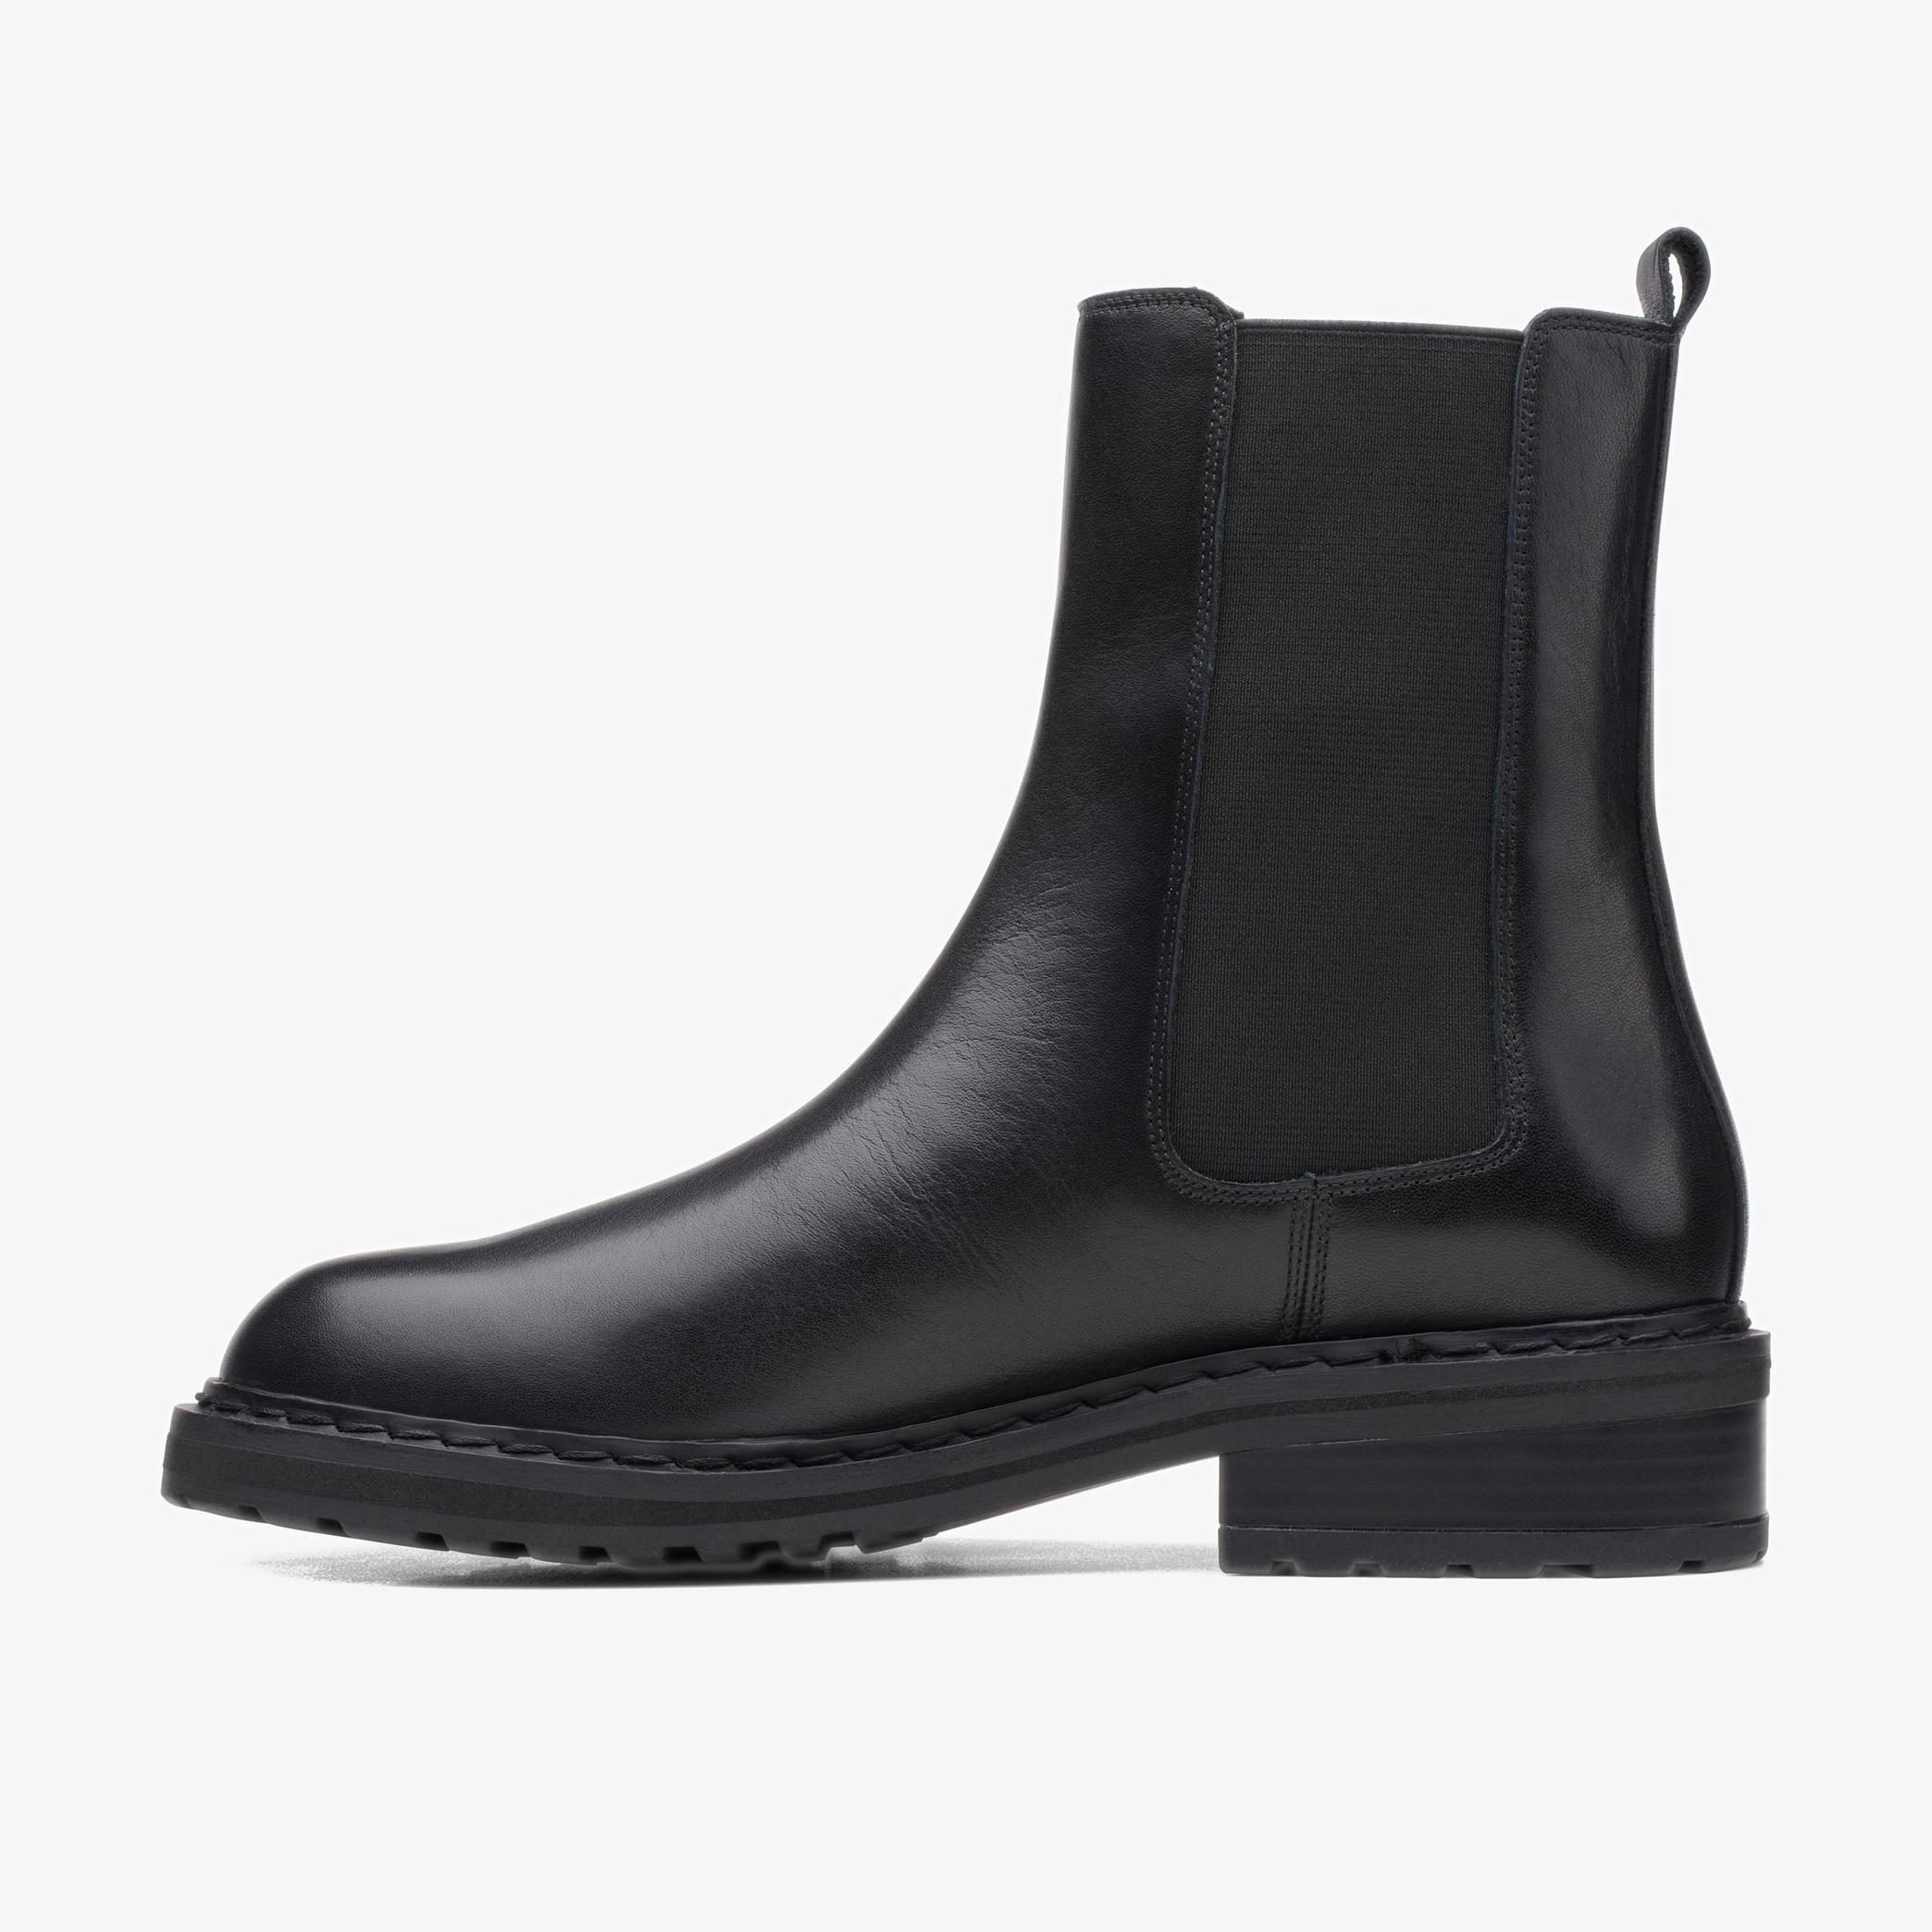 WOMENS Tilham Chelsea Black Leather Ankle Boots | Clarks Outlet